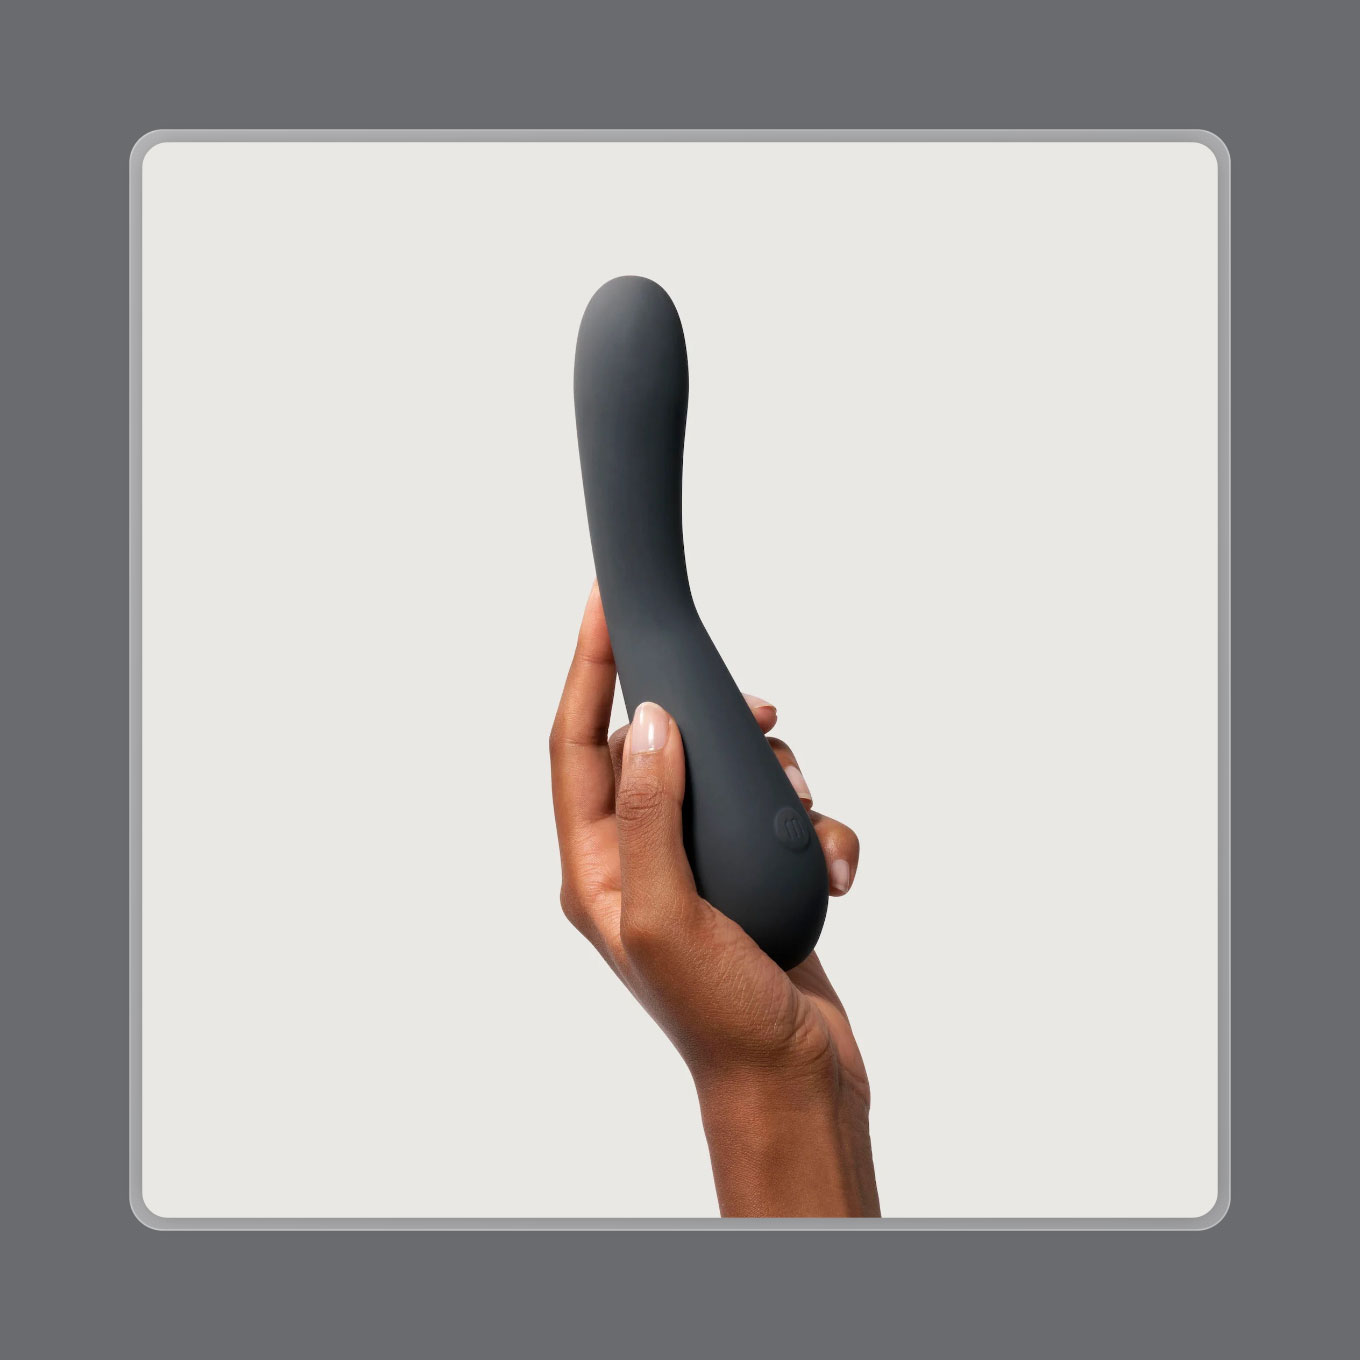 A hand holds up a dark grey vibrator